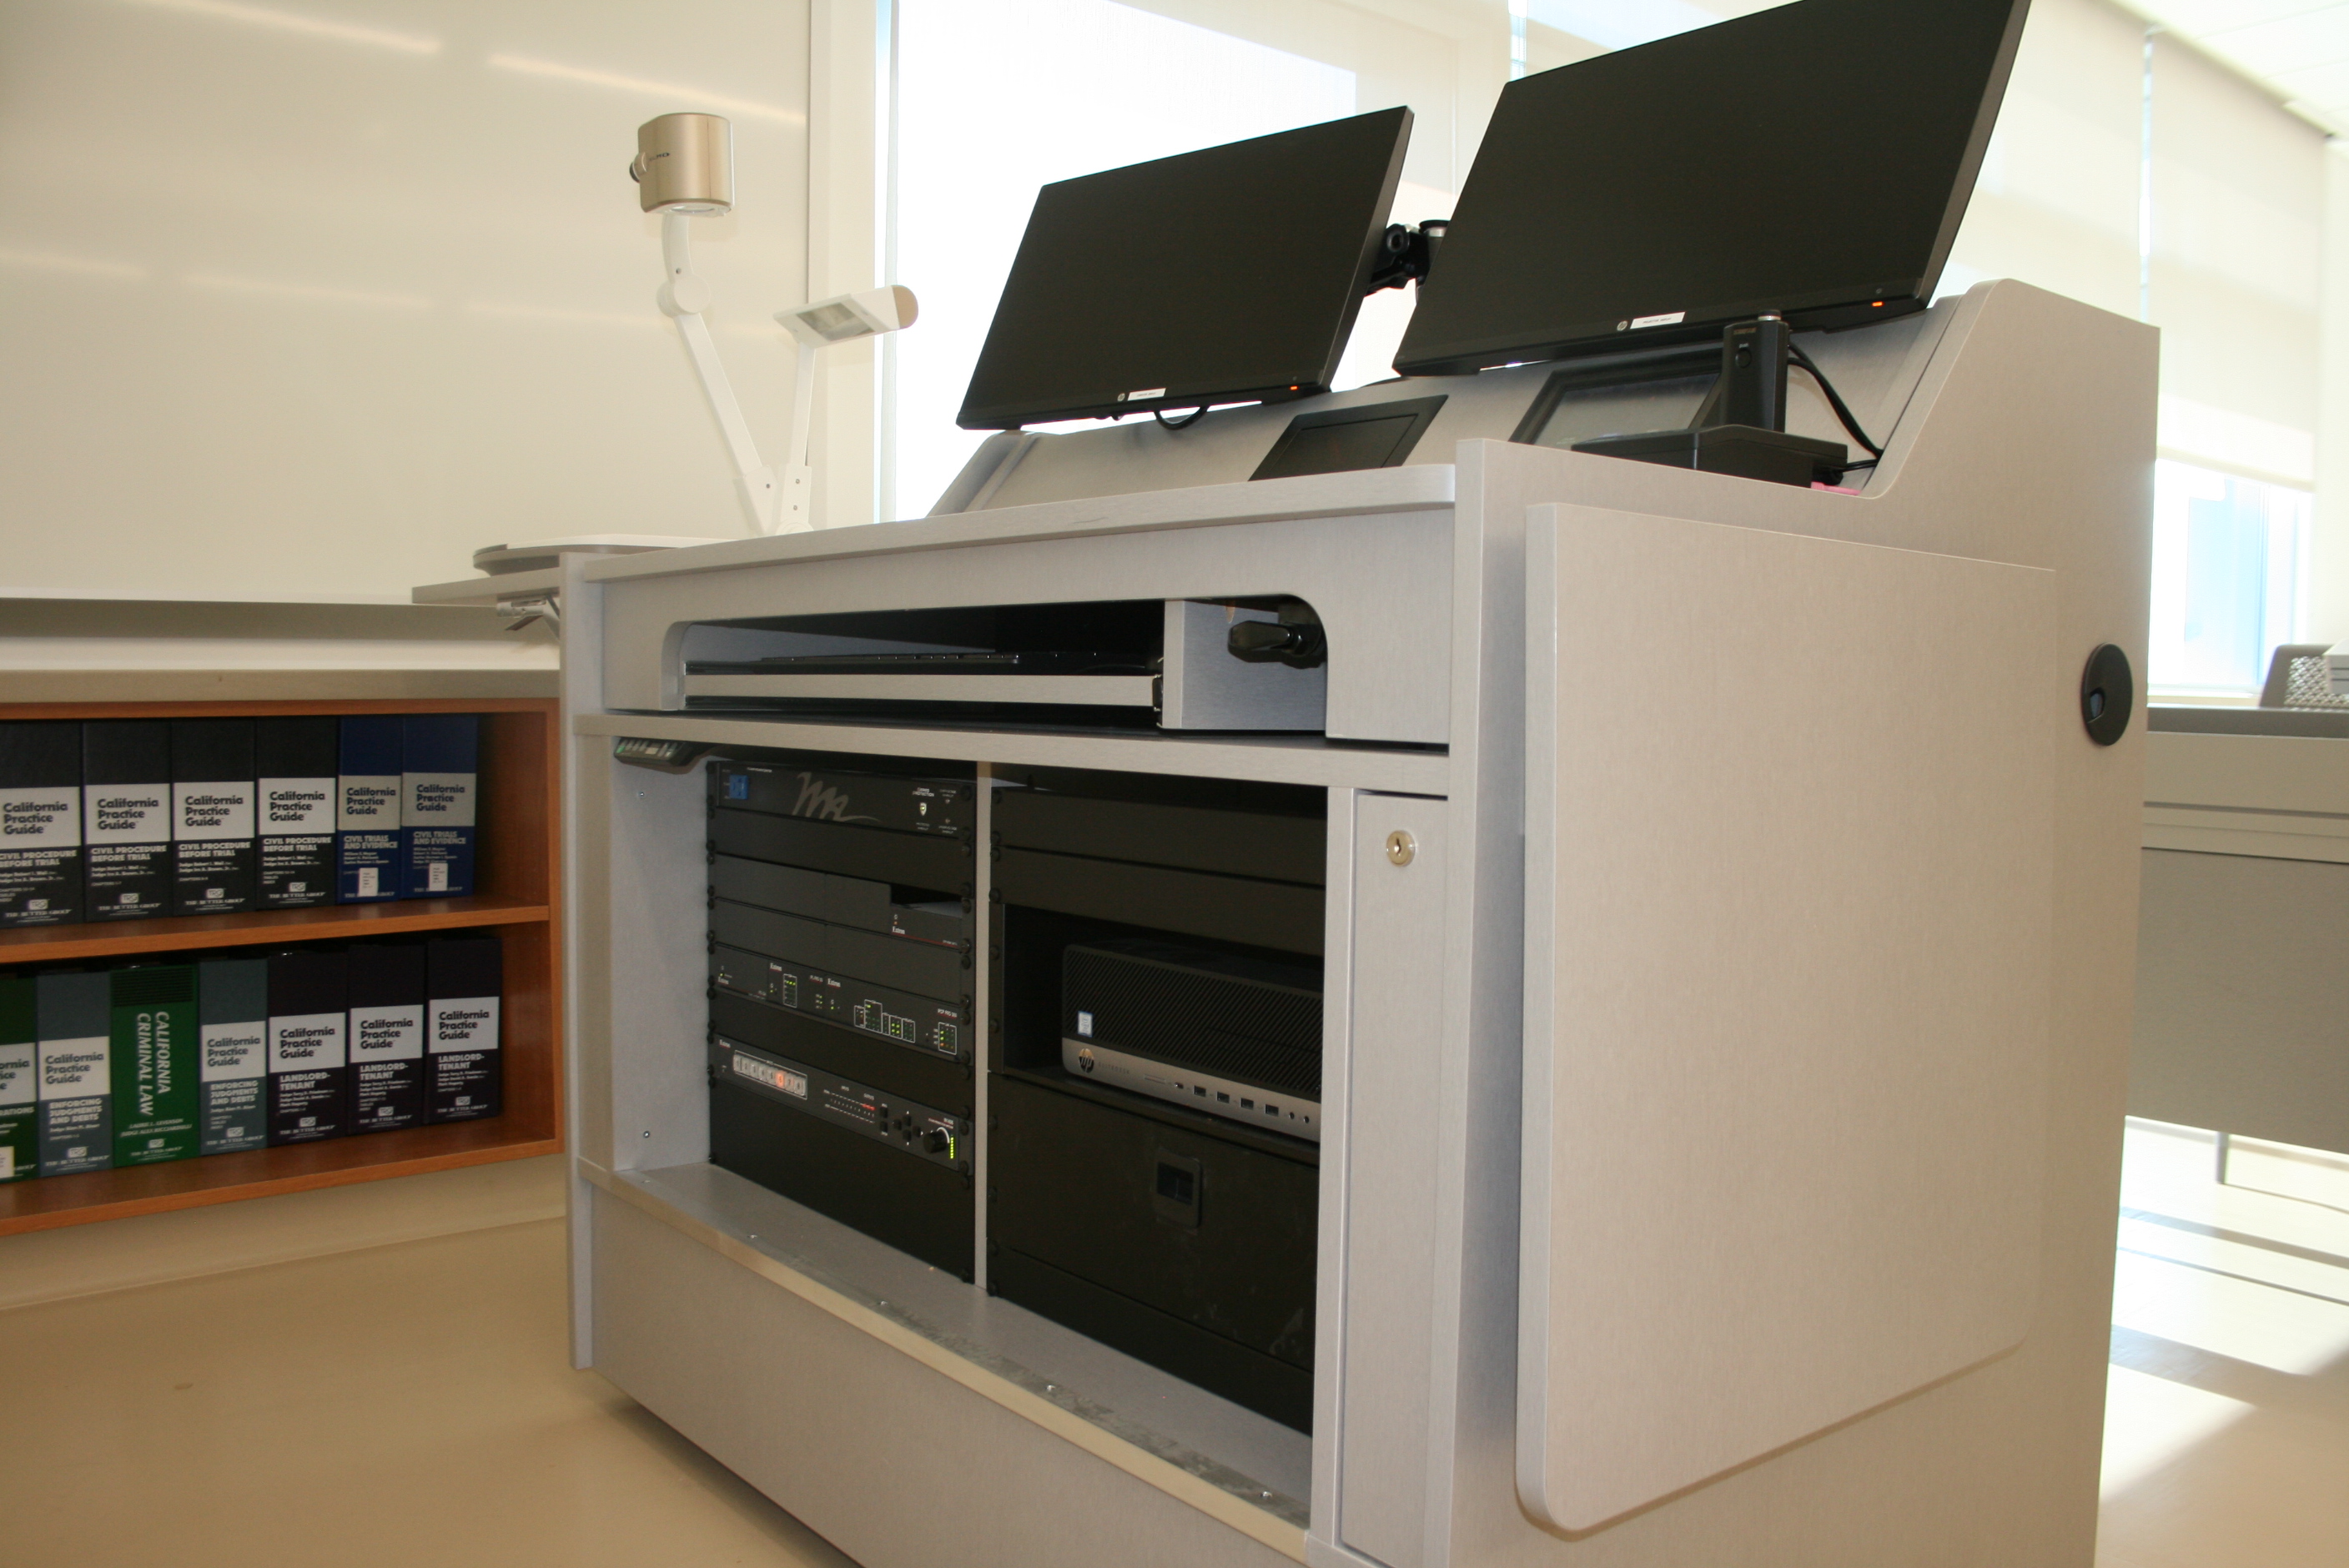 ADA-compliant teaching station with AV system components